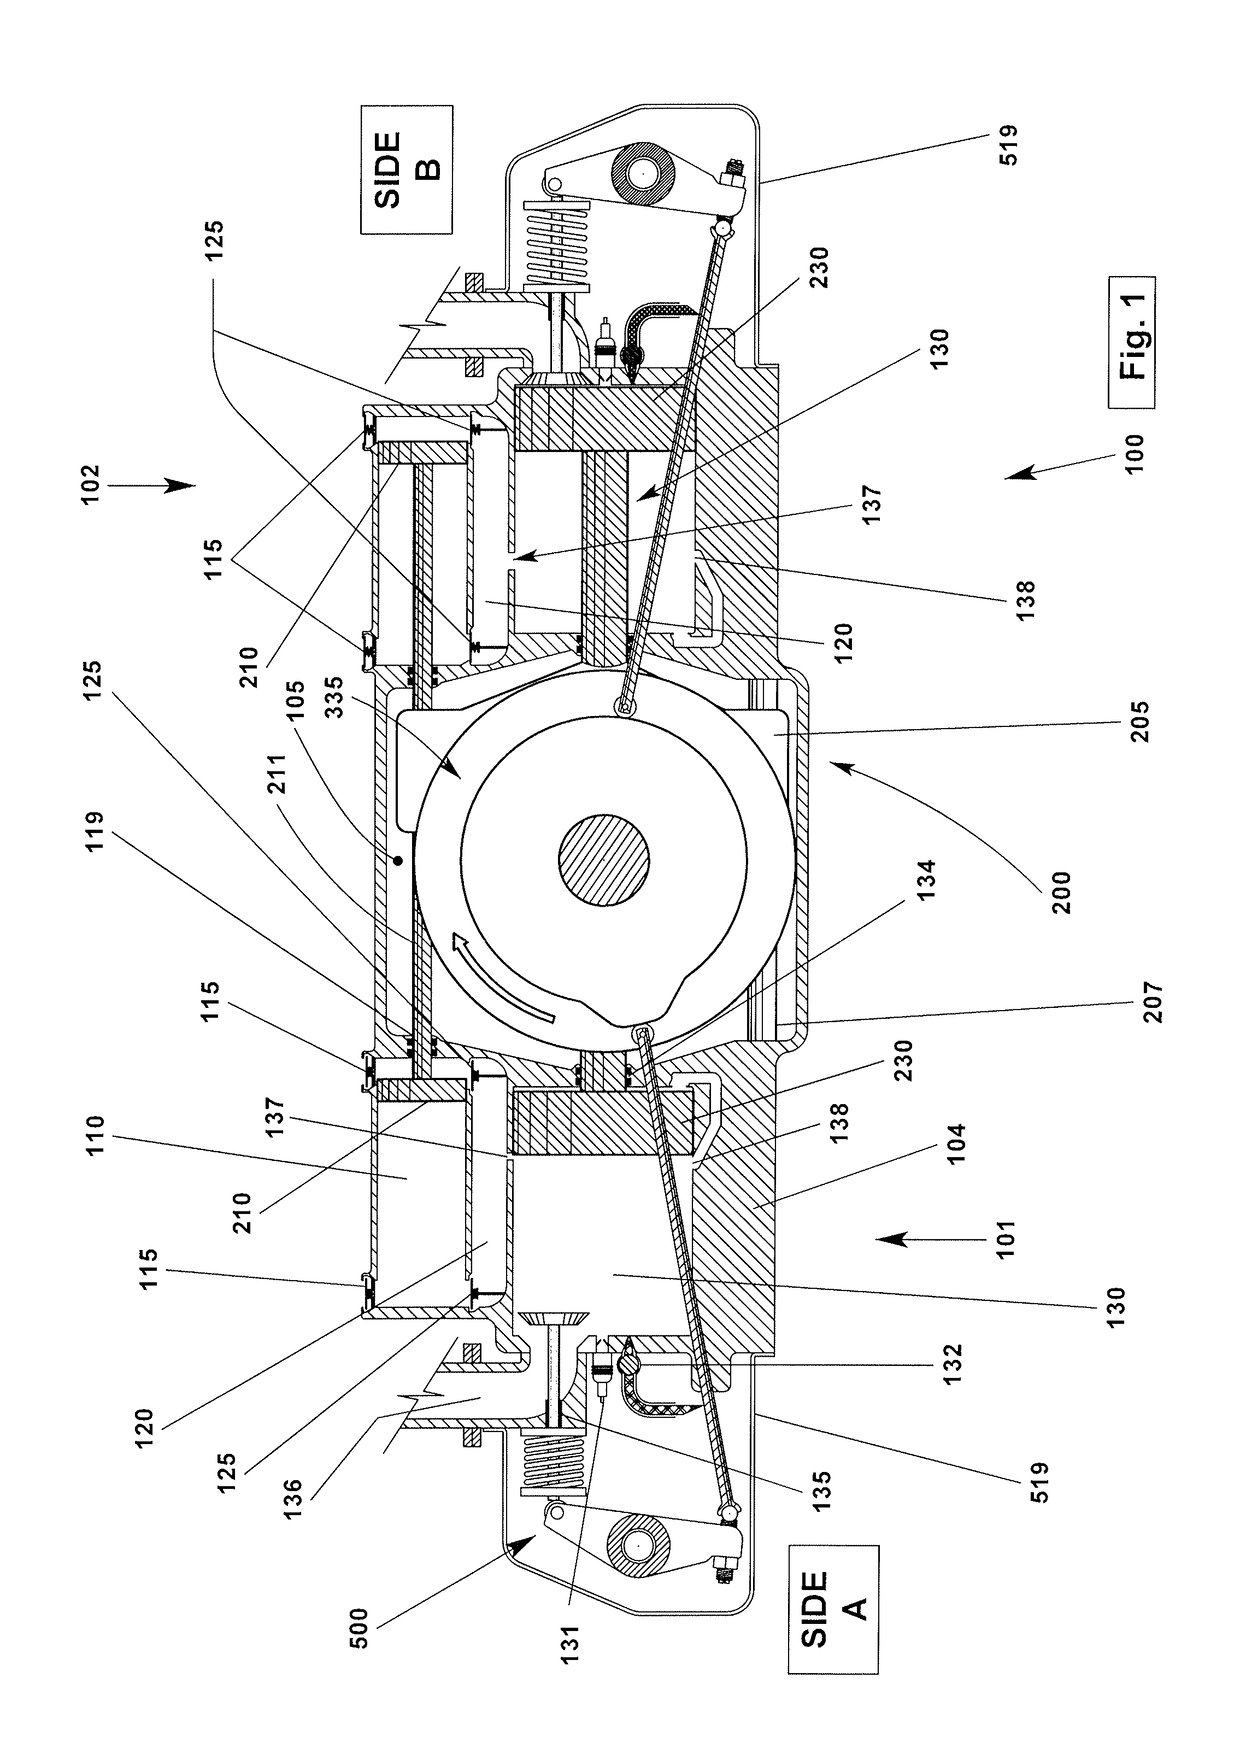 Opposed piston internal combustion engine with inviscid layer sealing